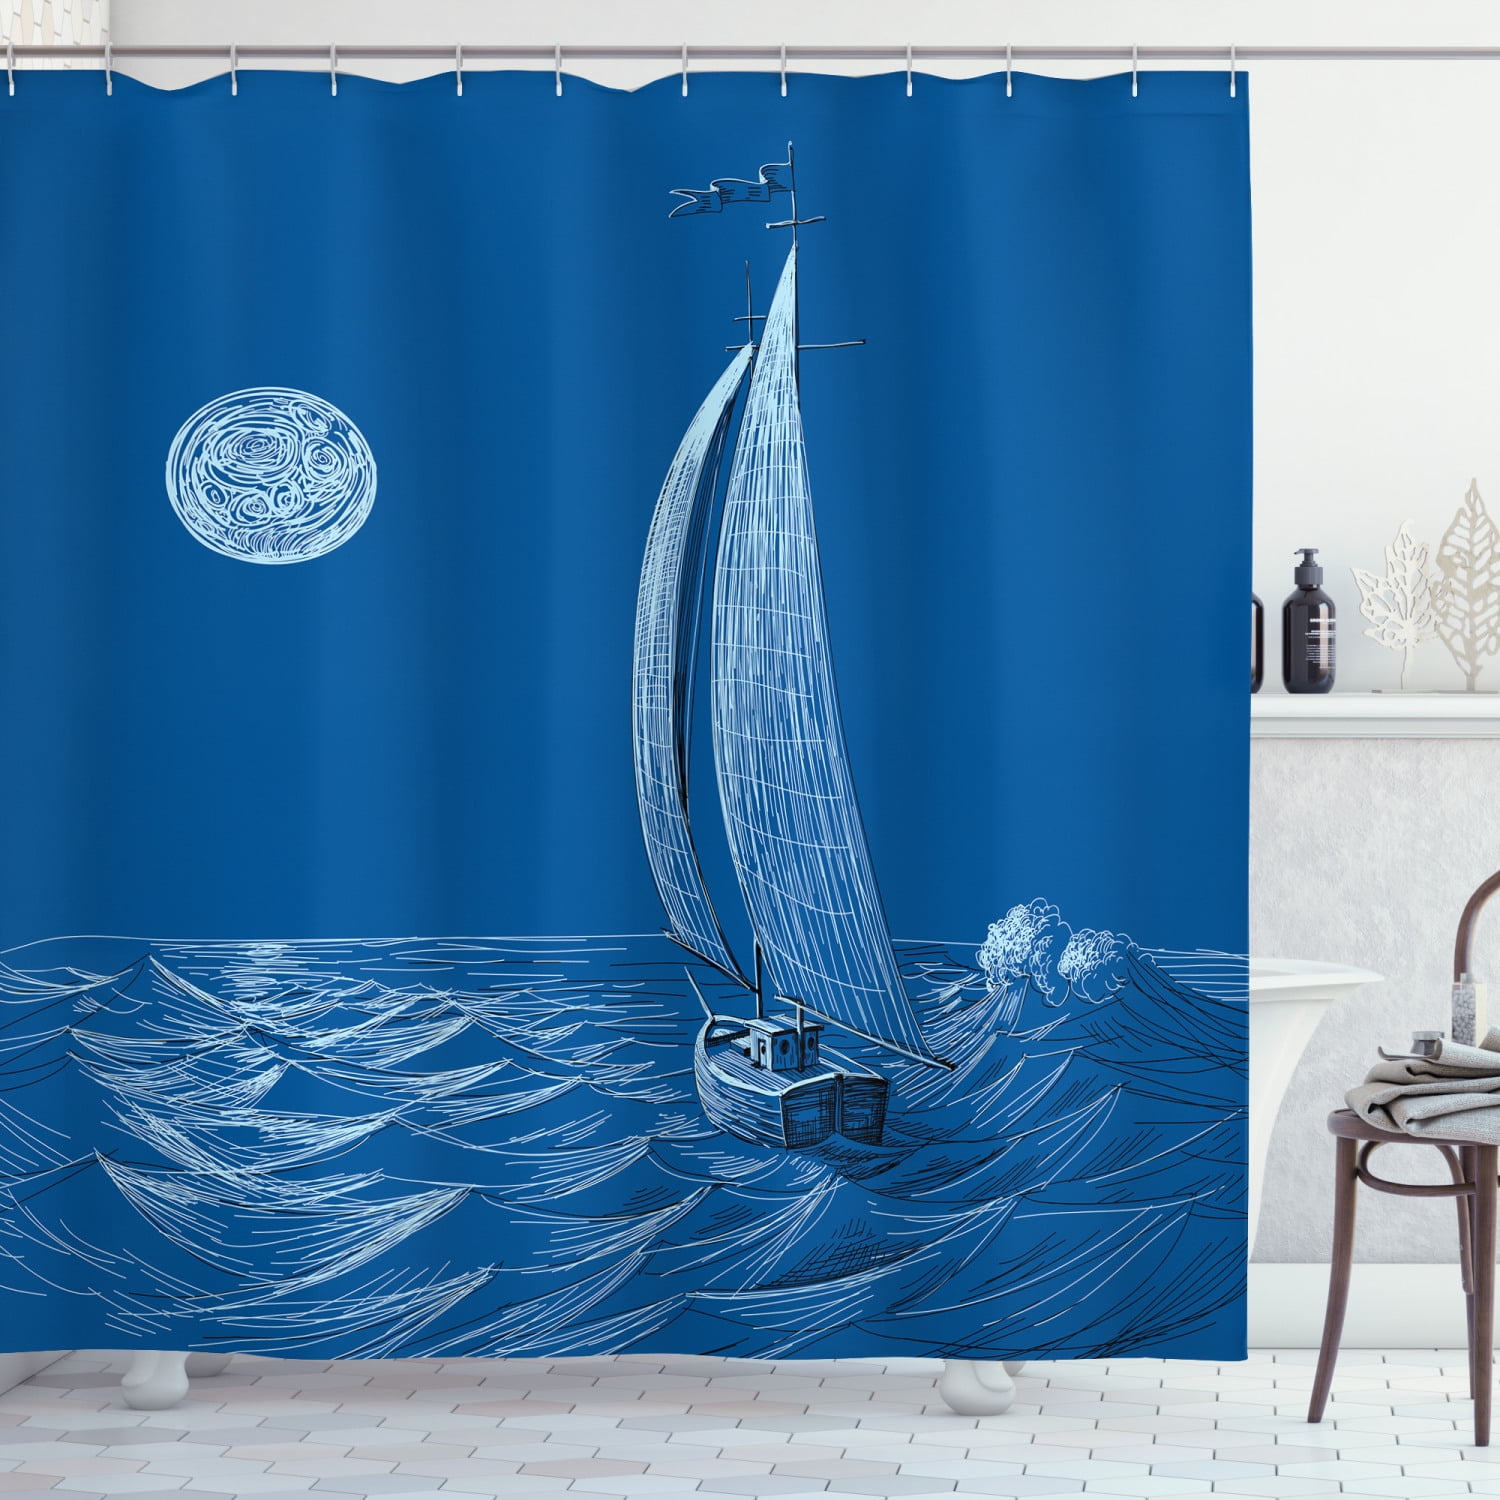 Vintage Pirate Bay Skull Boat Anchor Shower Curtain Set Waterproof Fabric 72x72" 